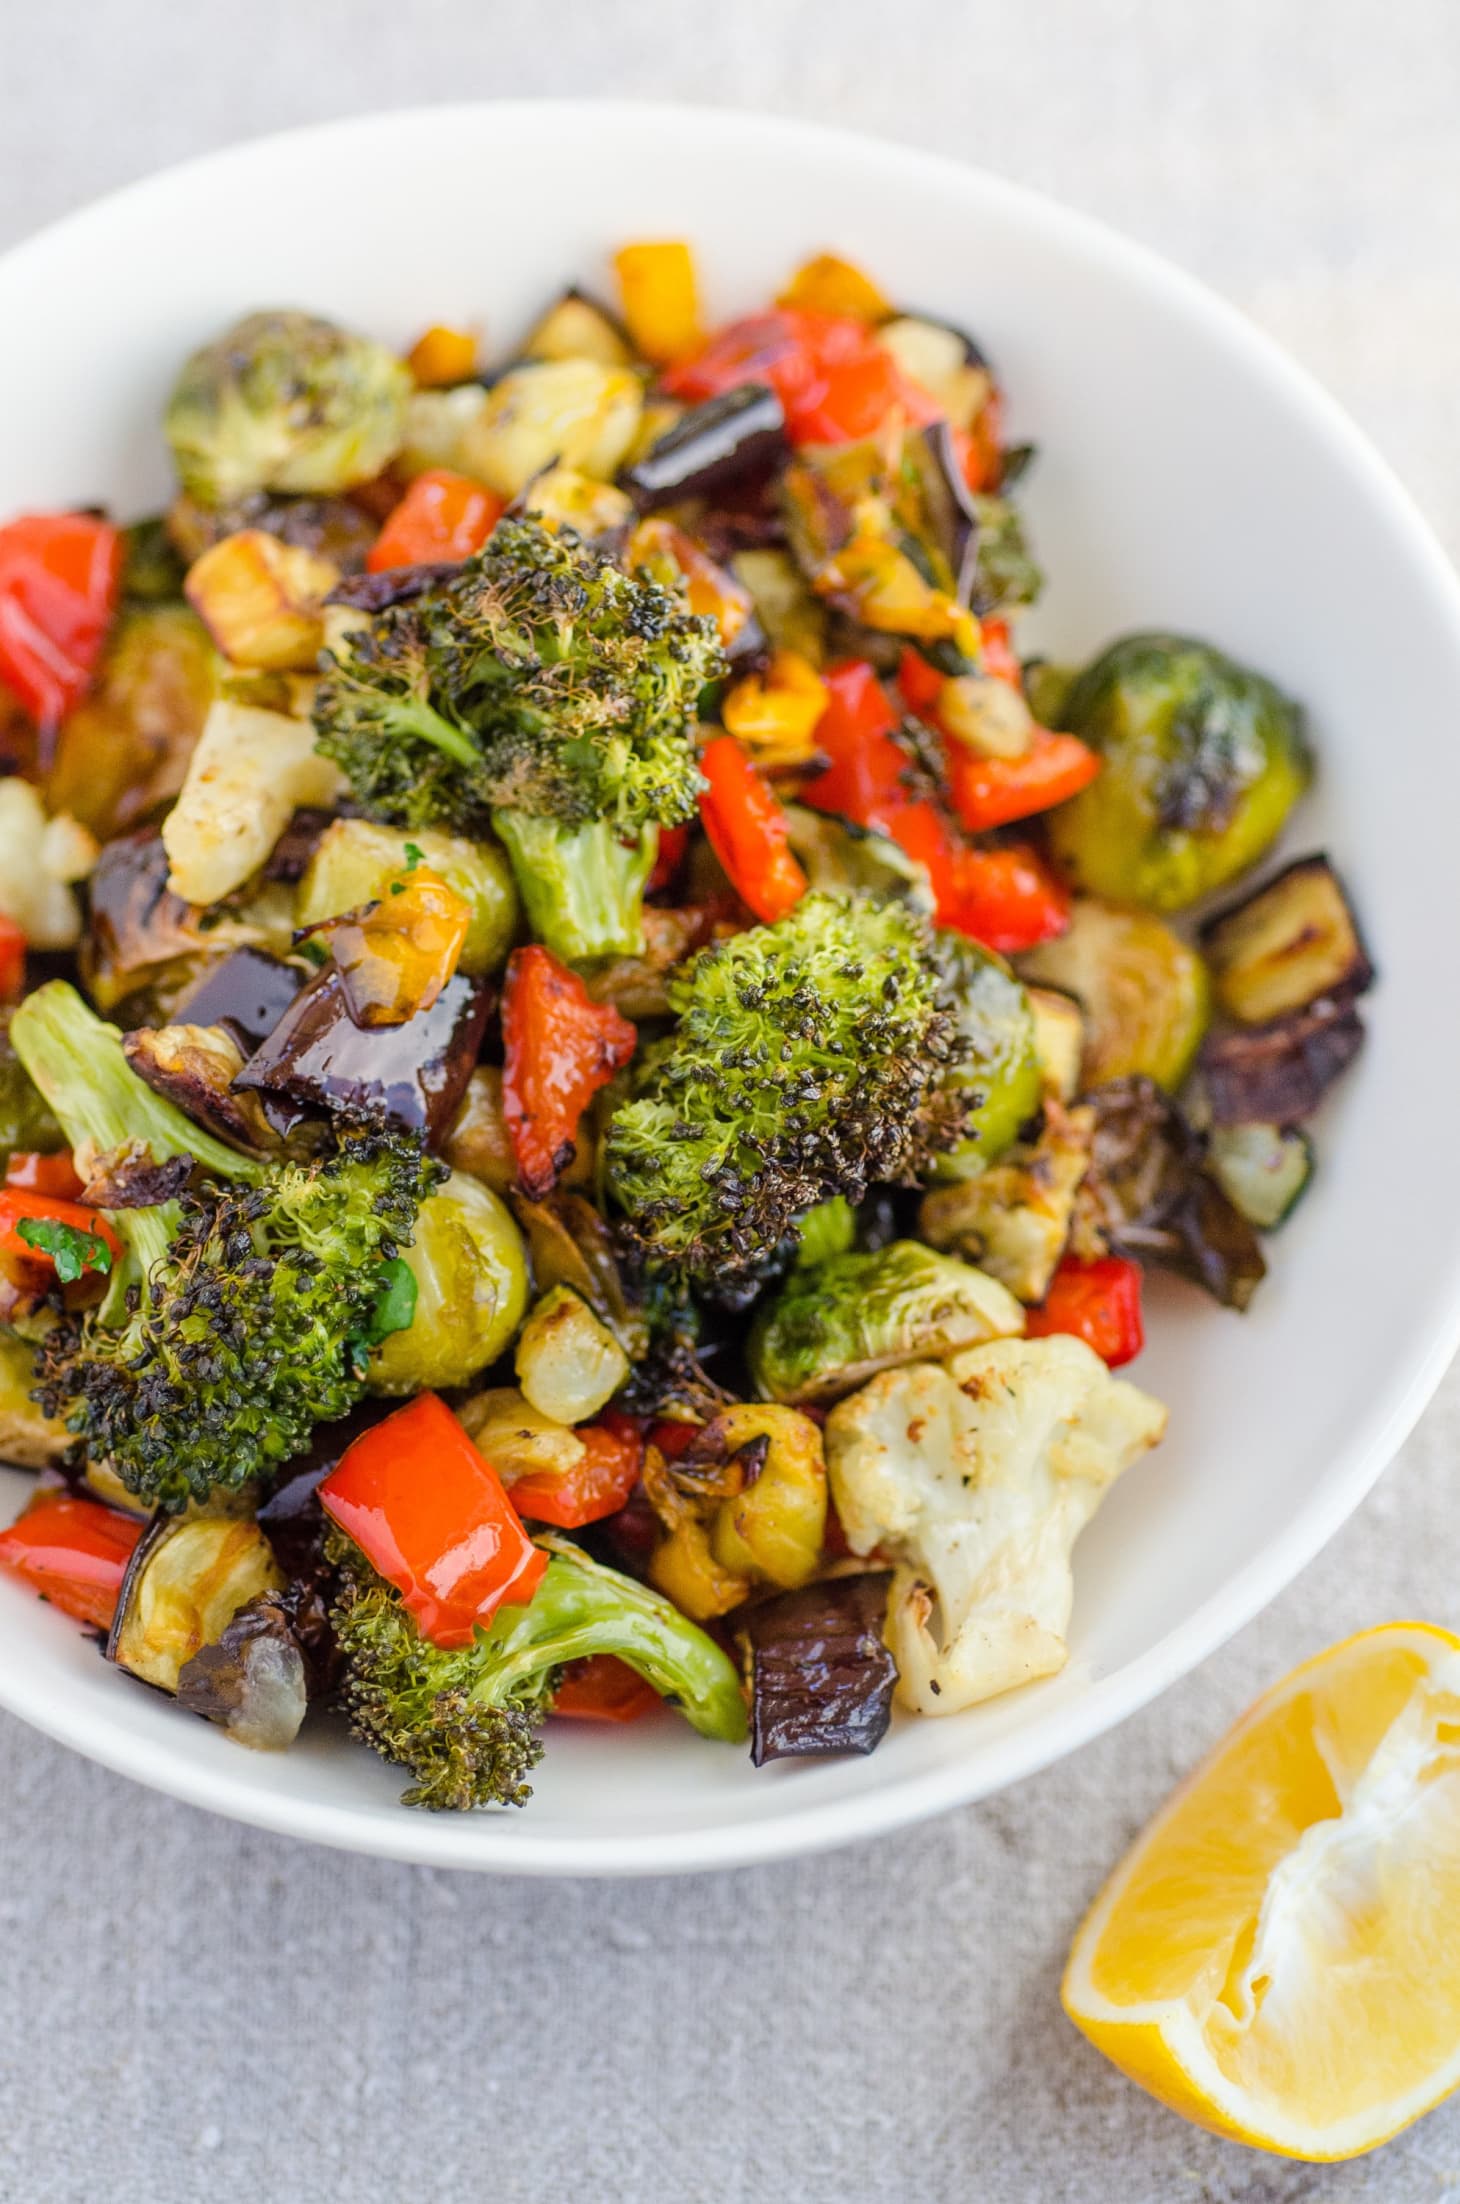 How To Roast Any Vegetable | Kitchn